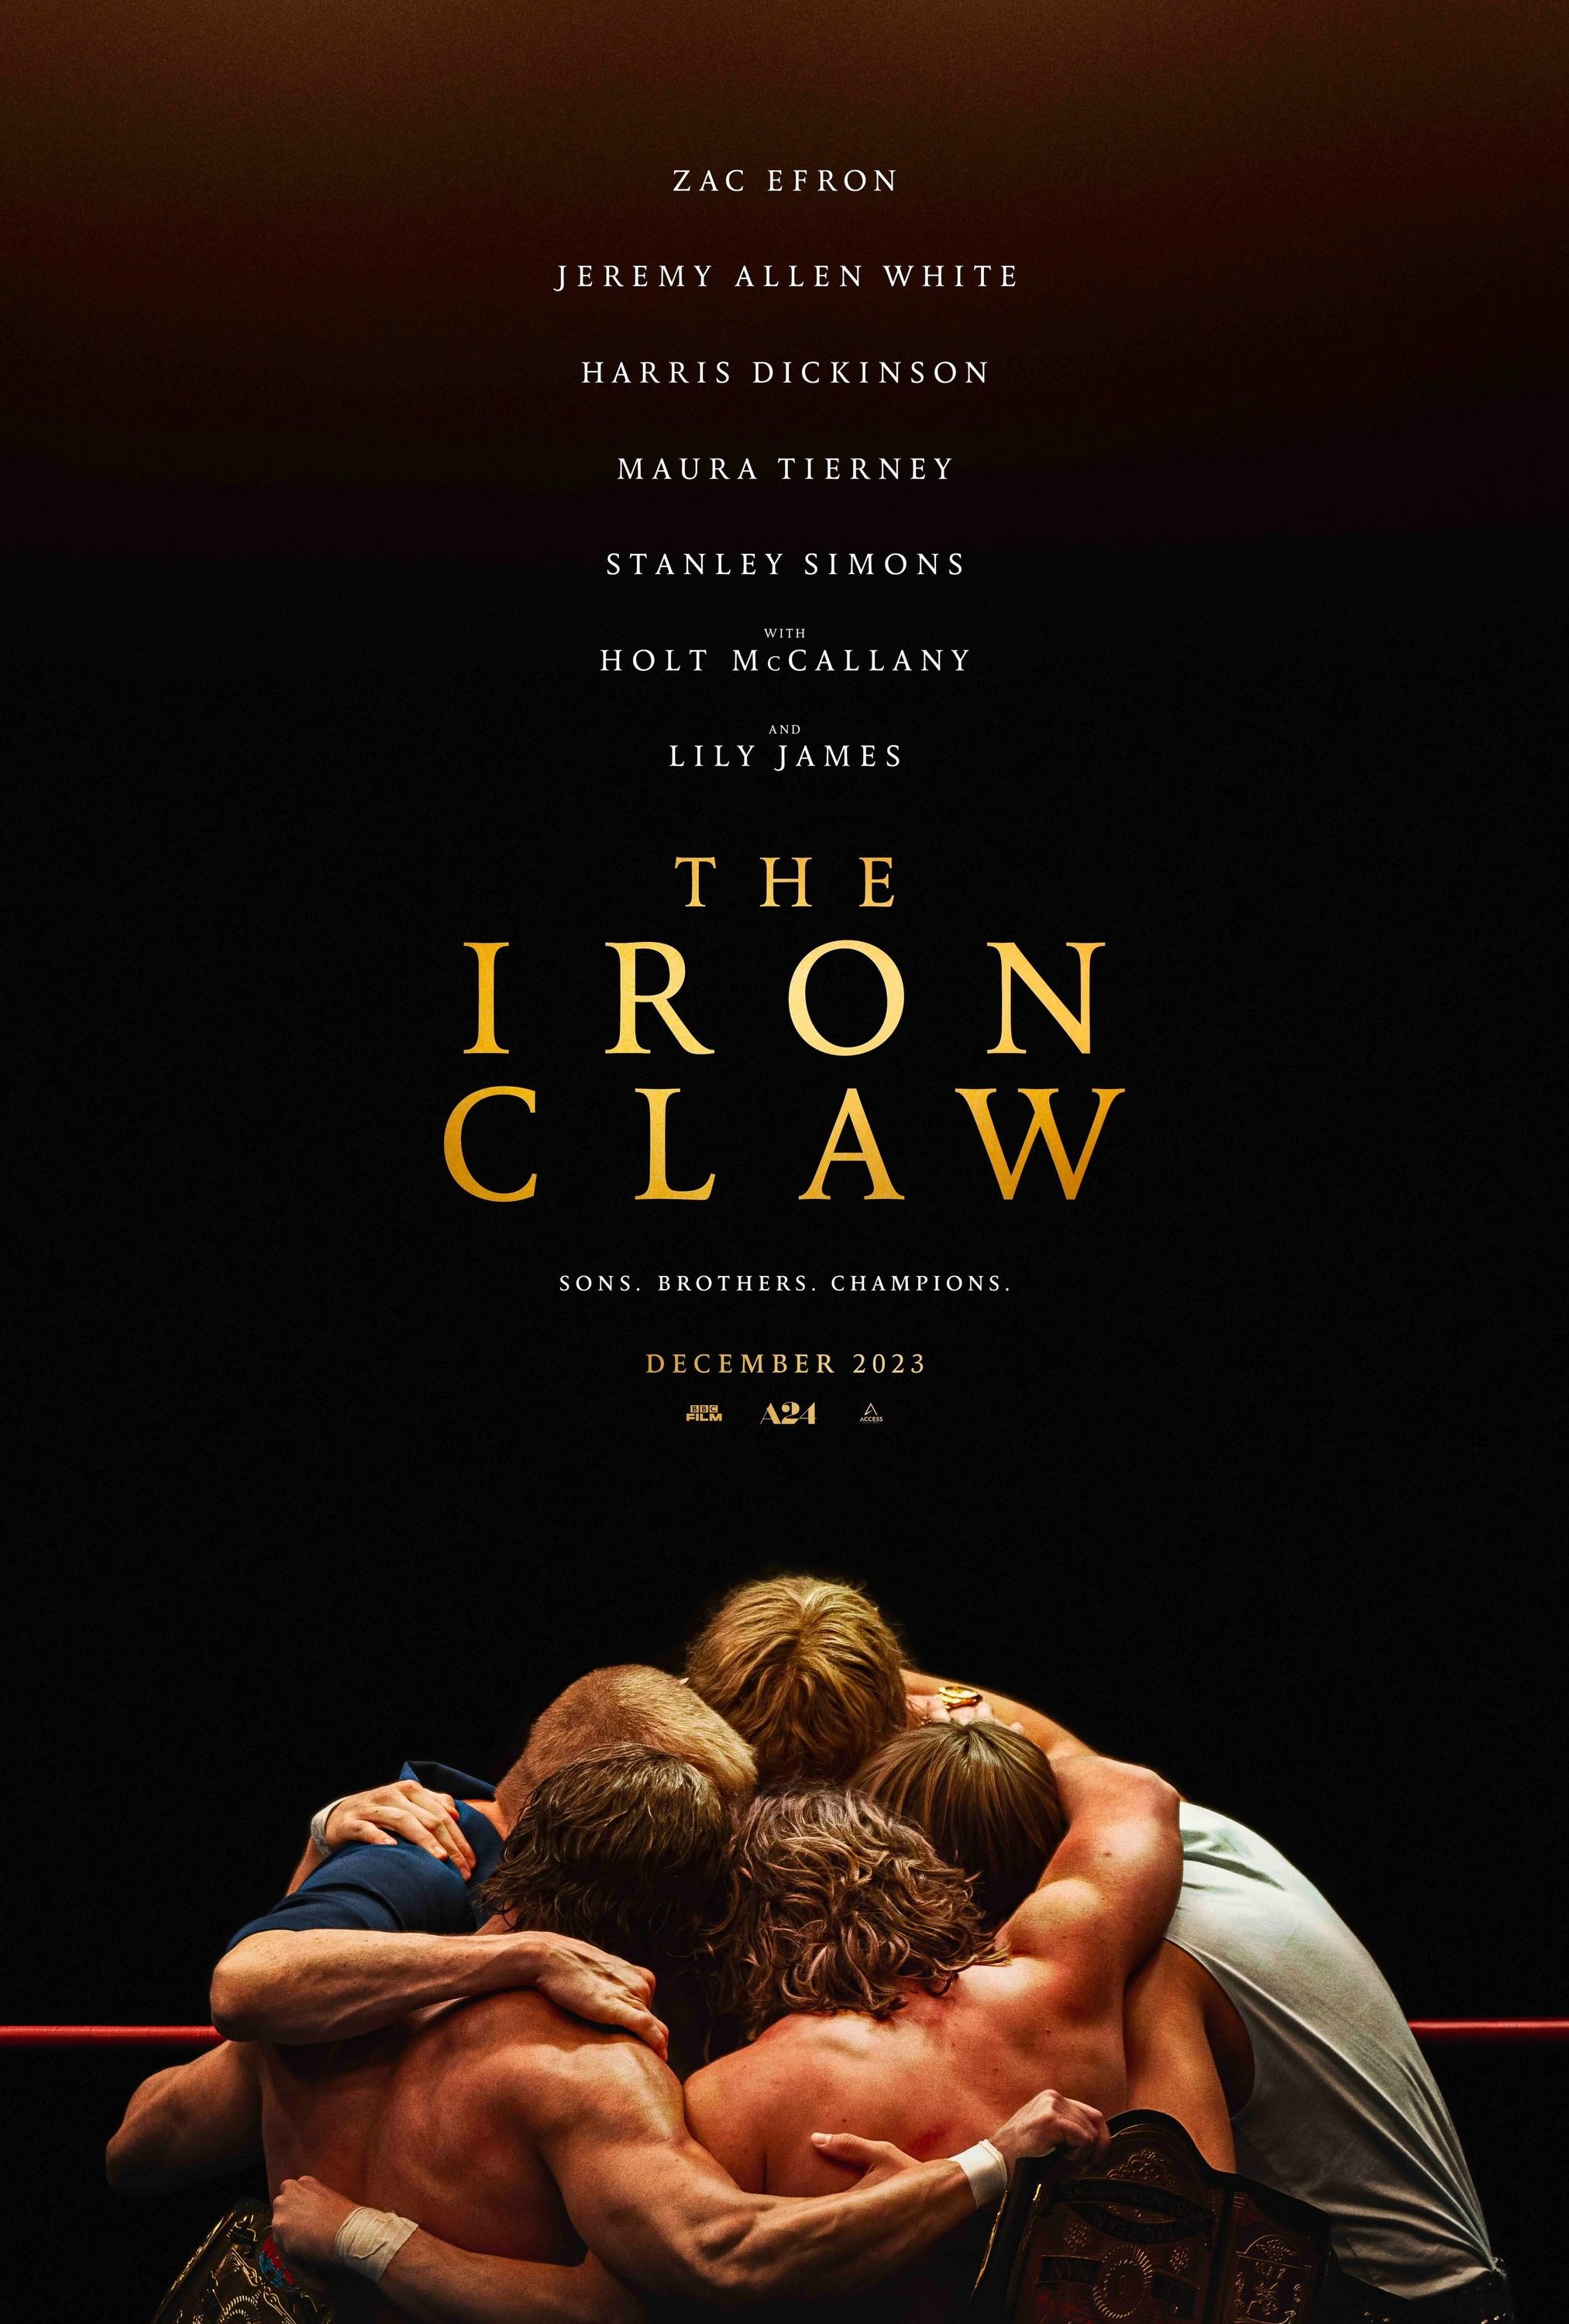 The Iron Claw 2023 Film Poster